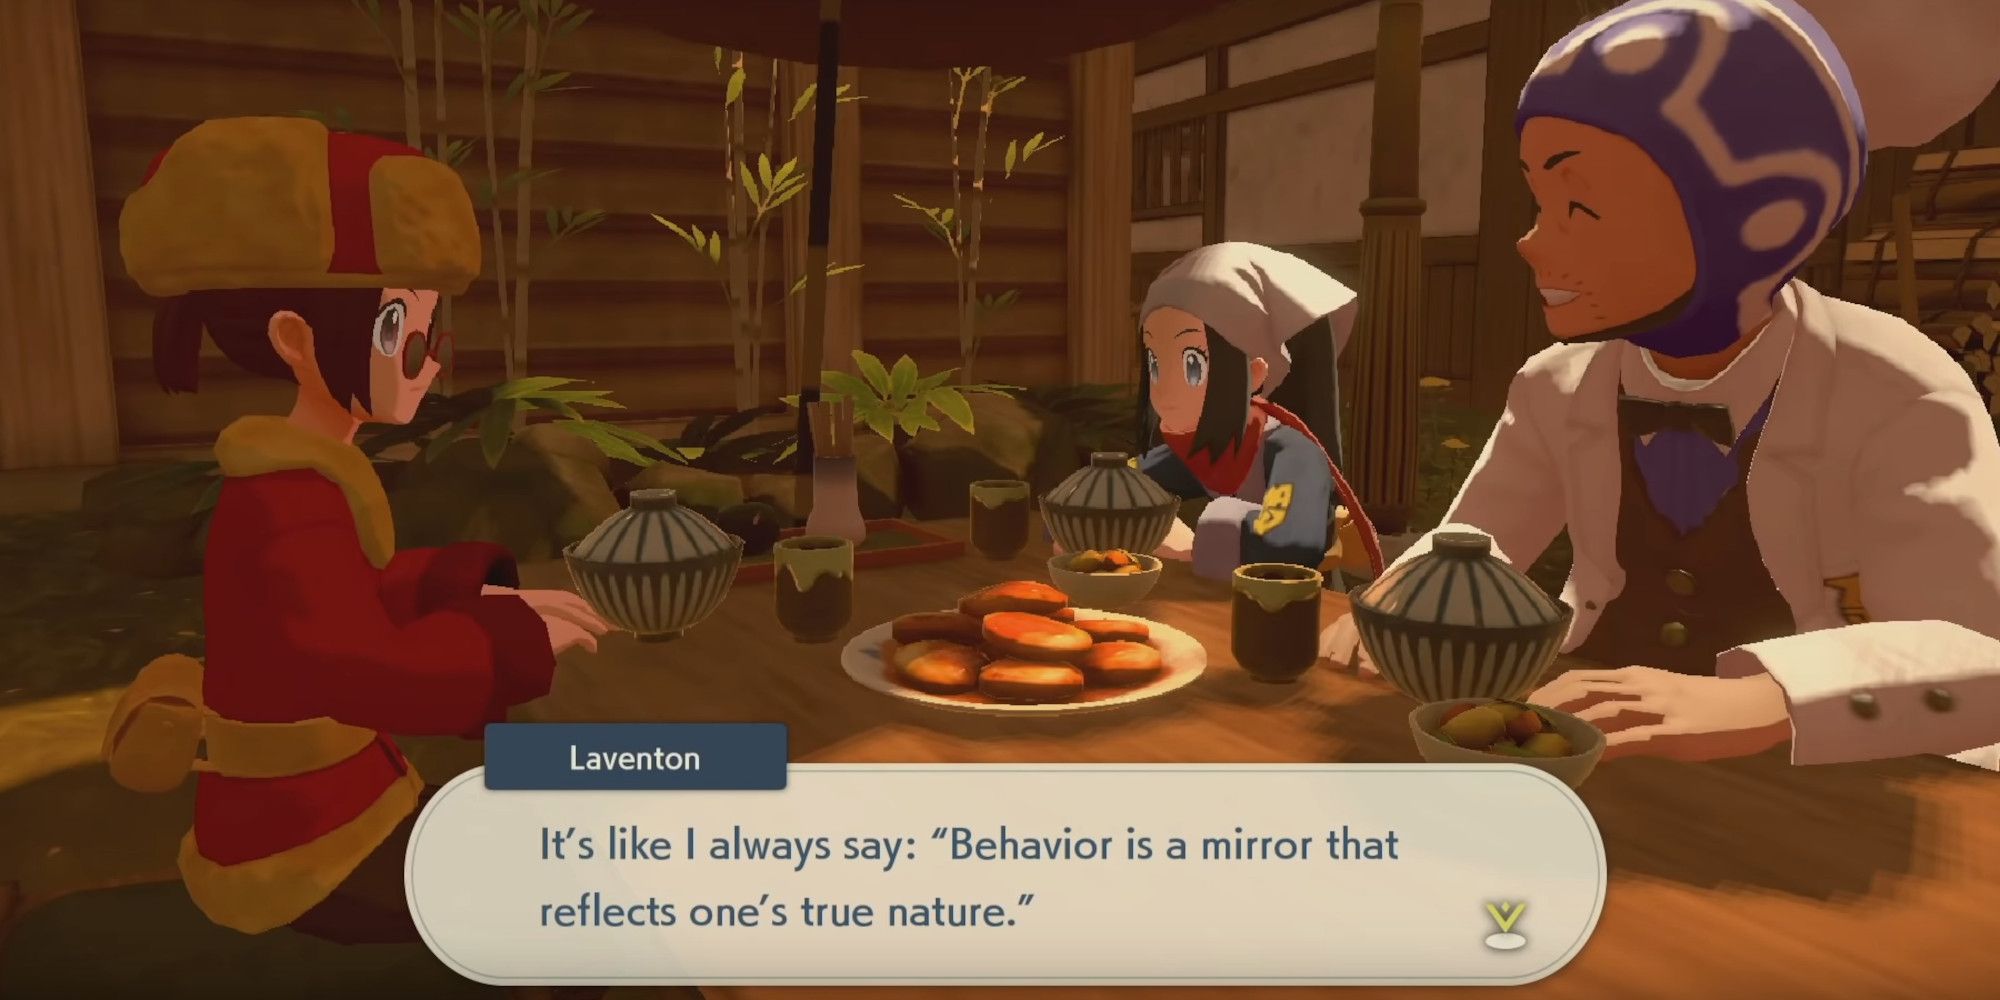 Laventon, the player, and Akari from Pokemon Legends Arceus sitting together at the Wallflower eating some potato mochi. Laventon is saying "It's like I always say: 'Behavior is a mirror that reflects one's true nature.'"